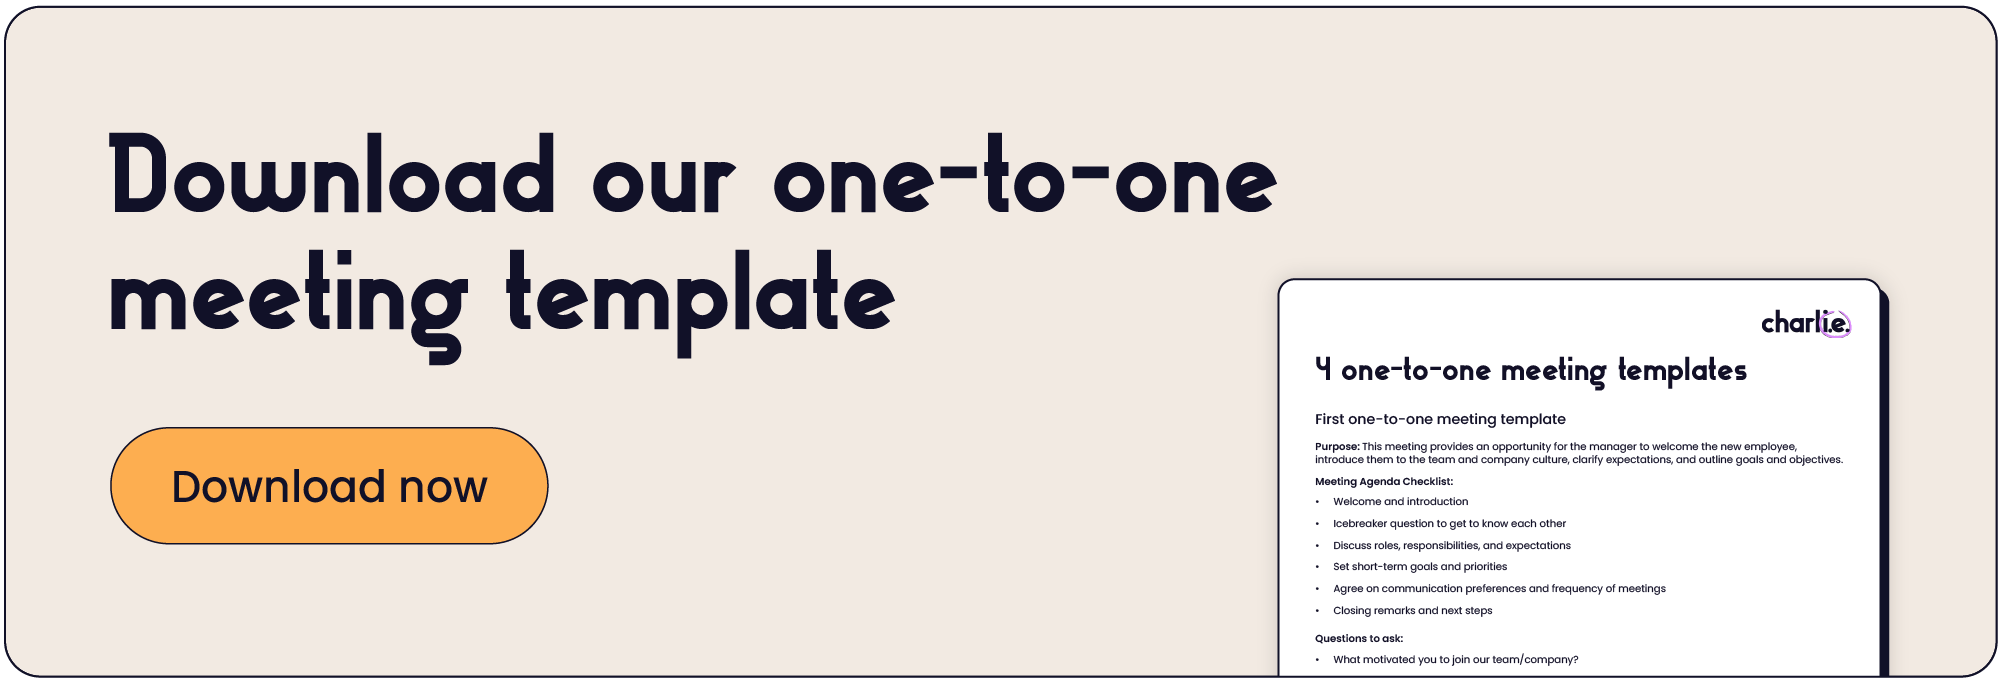 Download our one-to-one template.webp